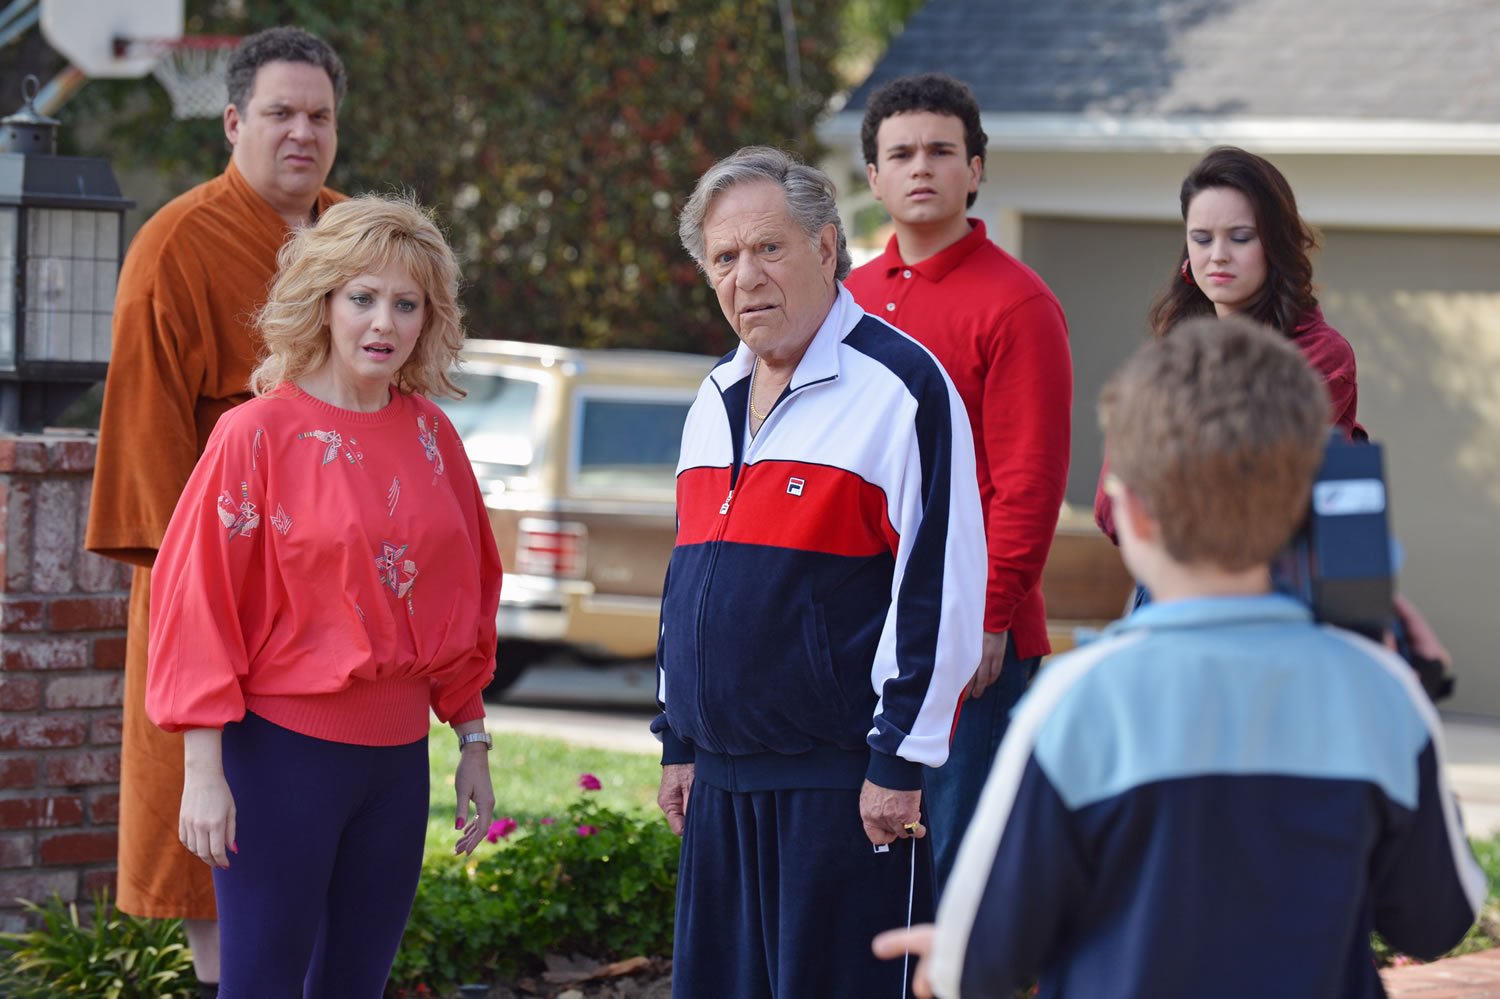 Jeff Garlin, from left, Wendi McLendon-Covey, George Segal, Troy Gentile, Sean Giambrone and Hayley Orrantia star in &quot;The Goldbergs,&quot; premiering at 9 p.m.